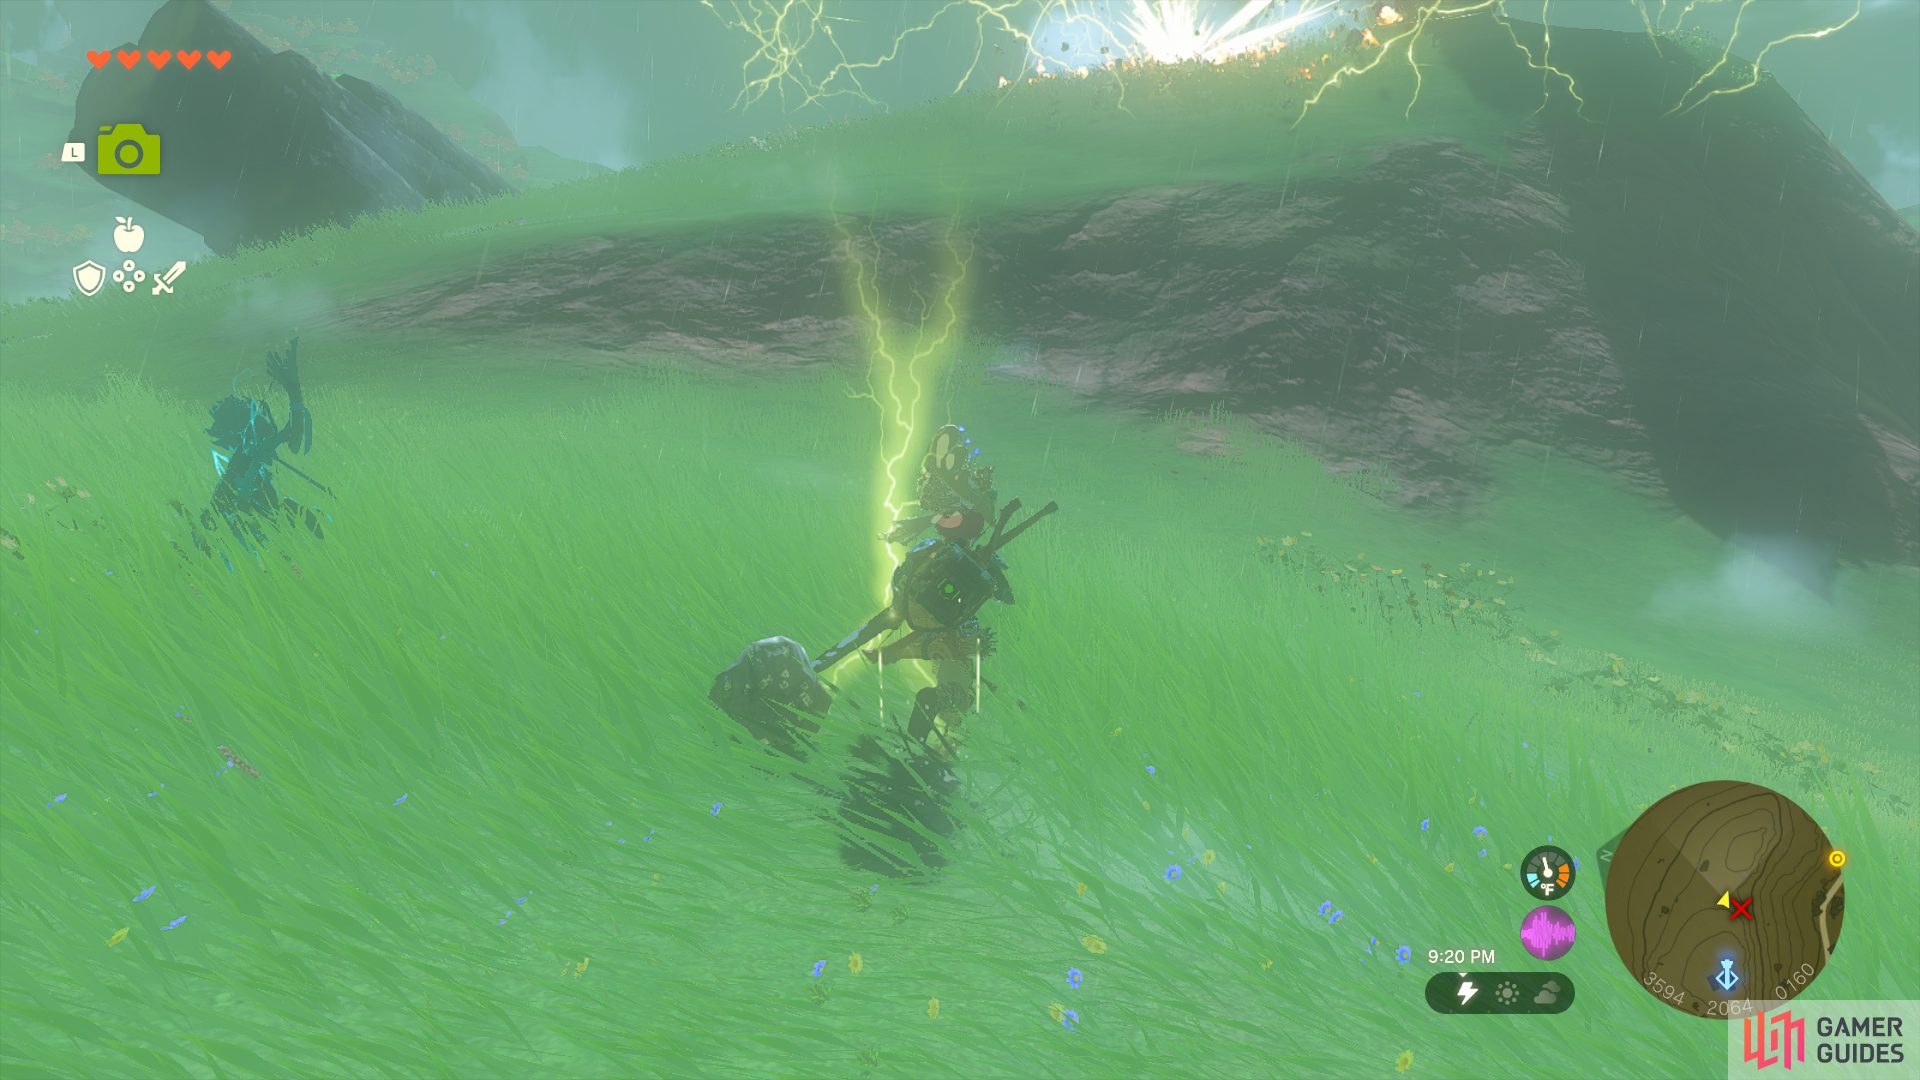 Link will have electricity build around him before being struck.